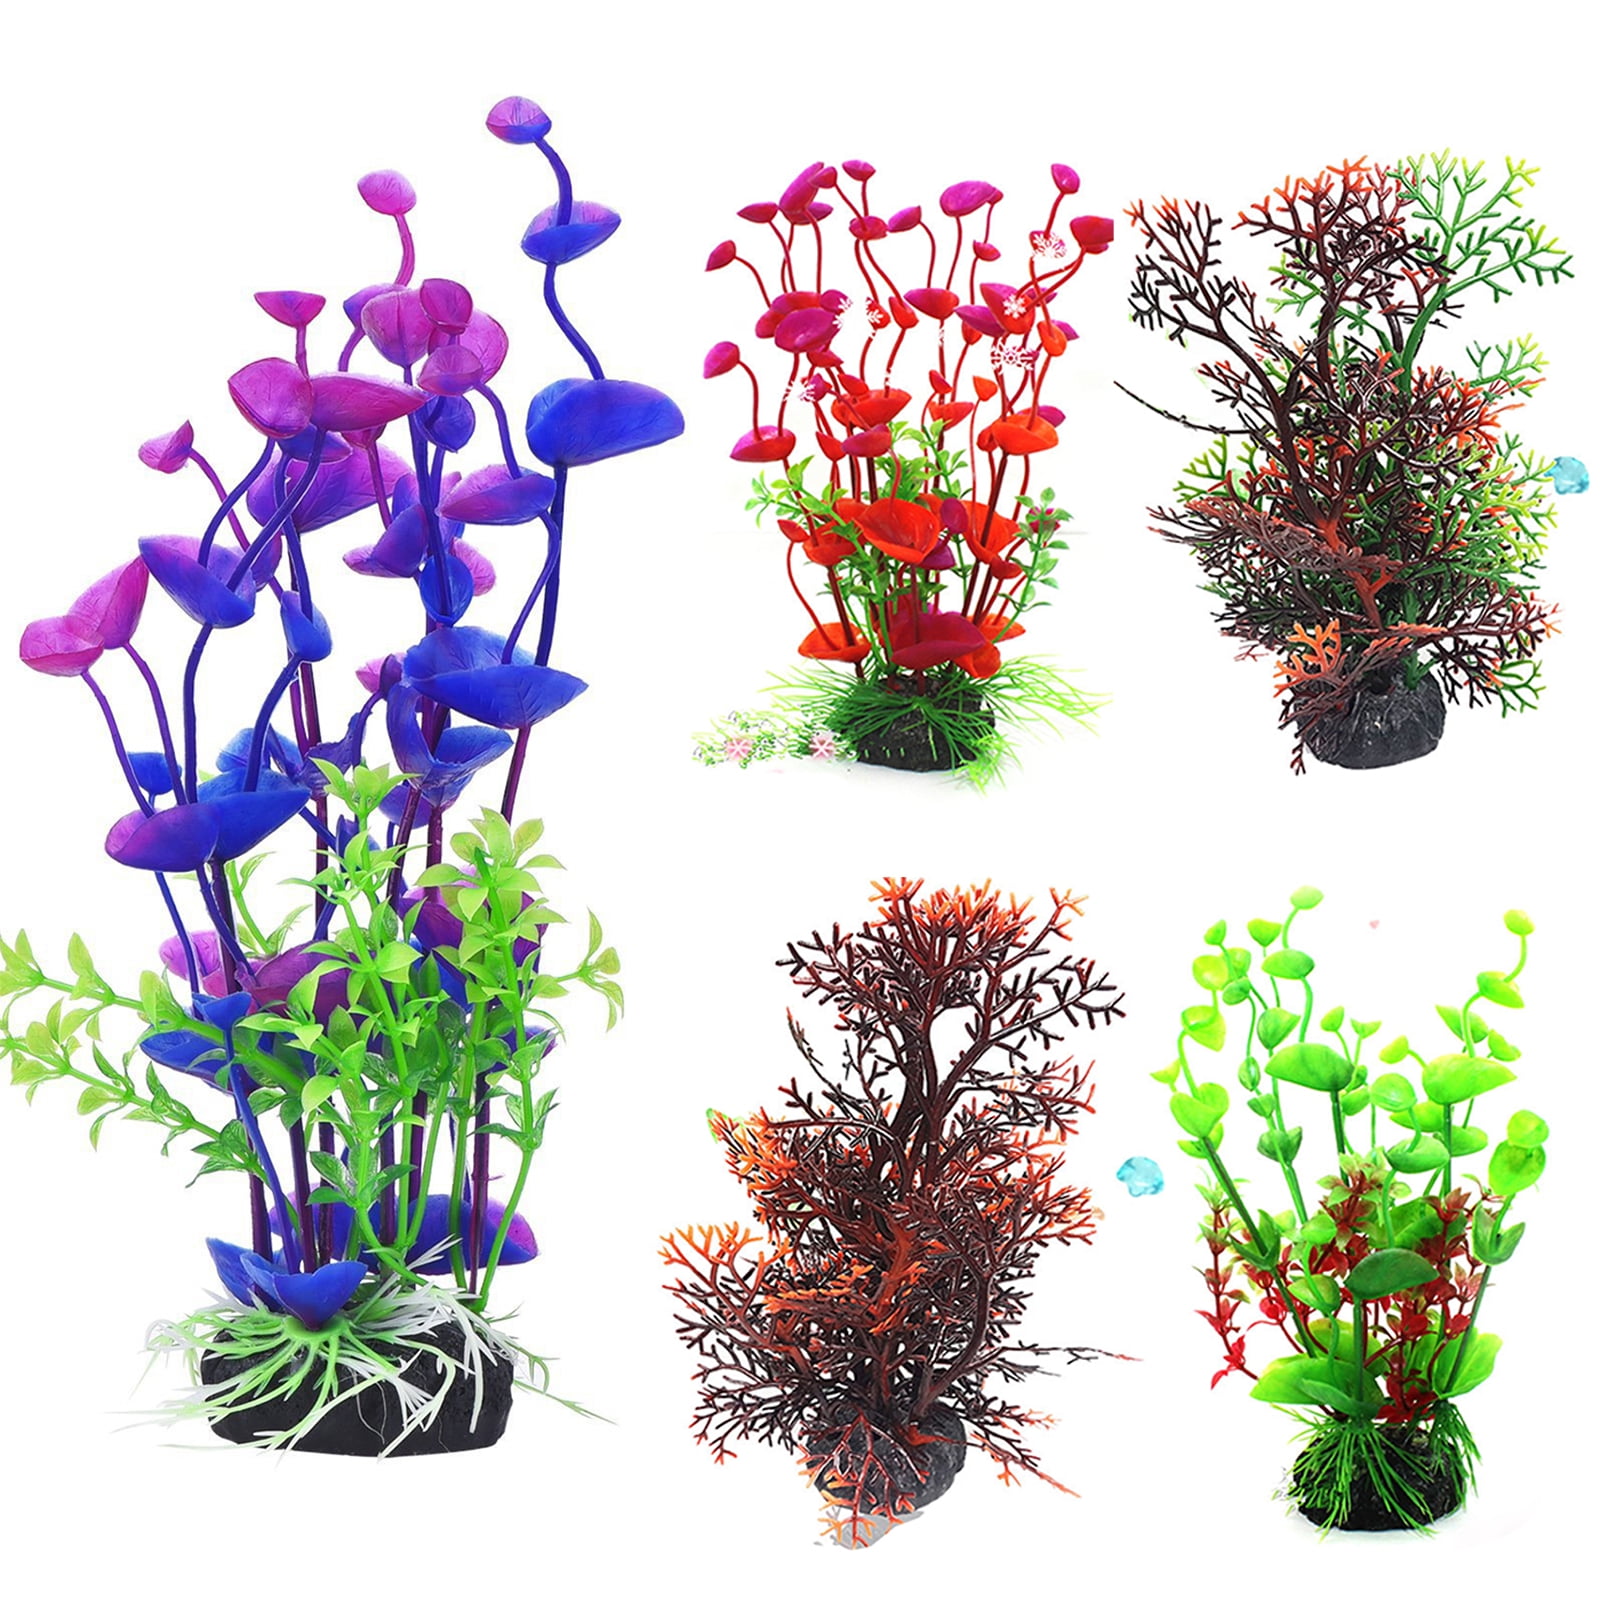 Fish Tank Accessories Aquarium Decorations Plants Artificial Seaweed Water Plants Fish Tank Plant Decorations for Household Office 6.6 inches Tall Rose Red